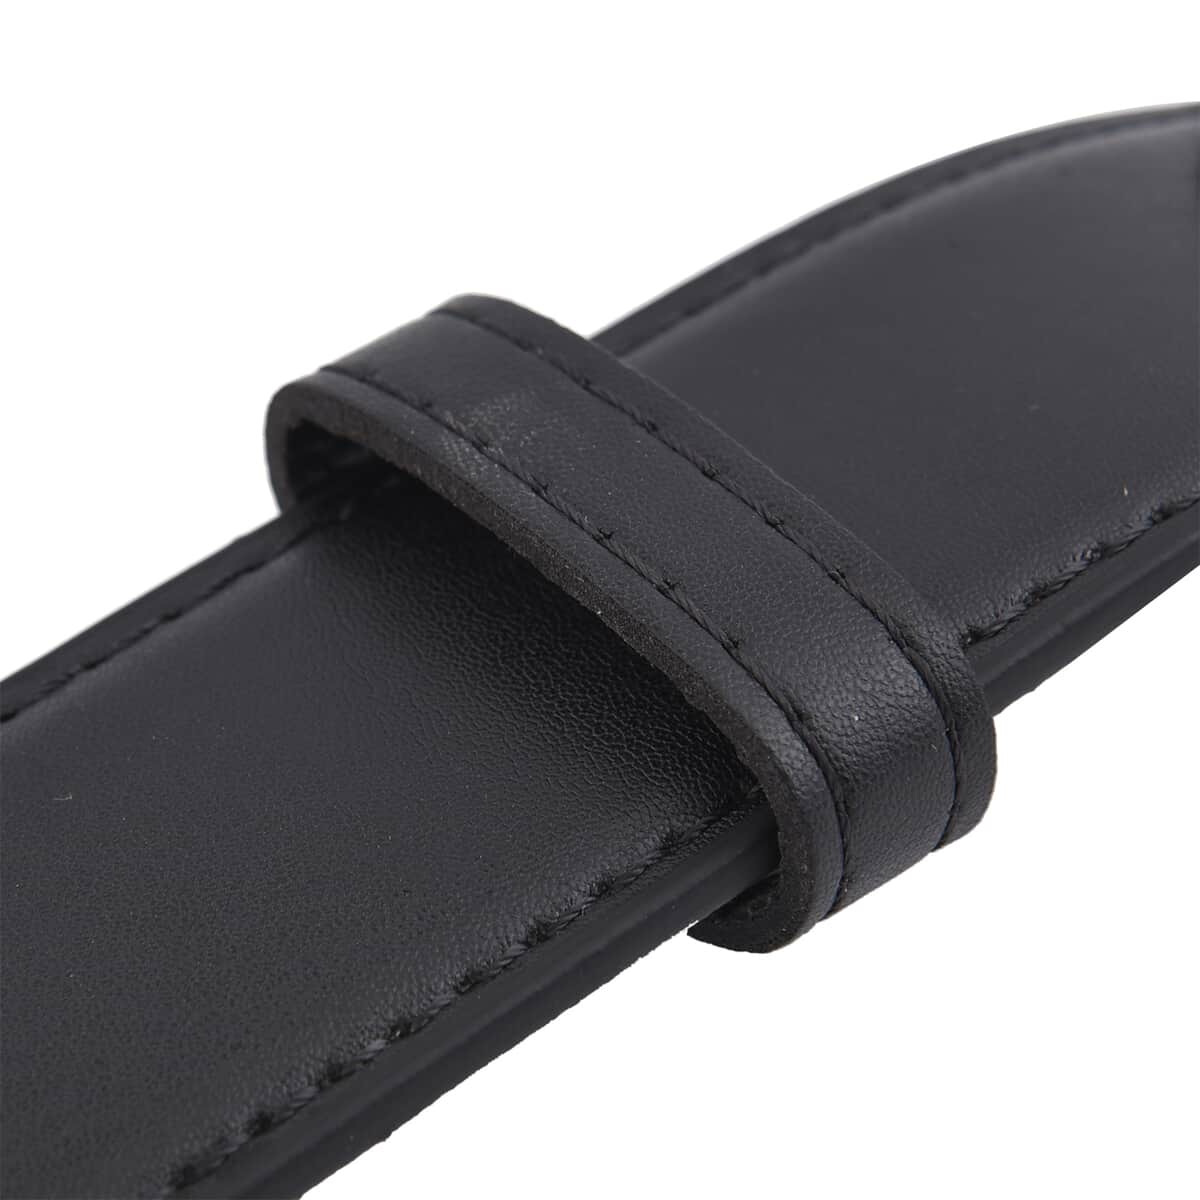 2-in-1 Black Wallet Faux Leather Belt with Hidden Zipper Pocket - L (47-49 Inches) image number 3